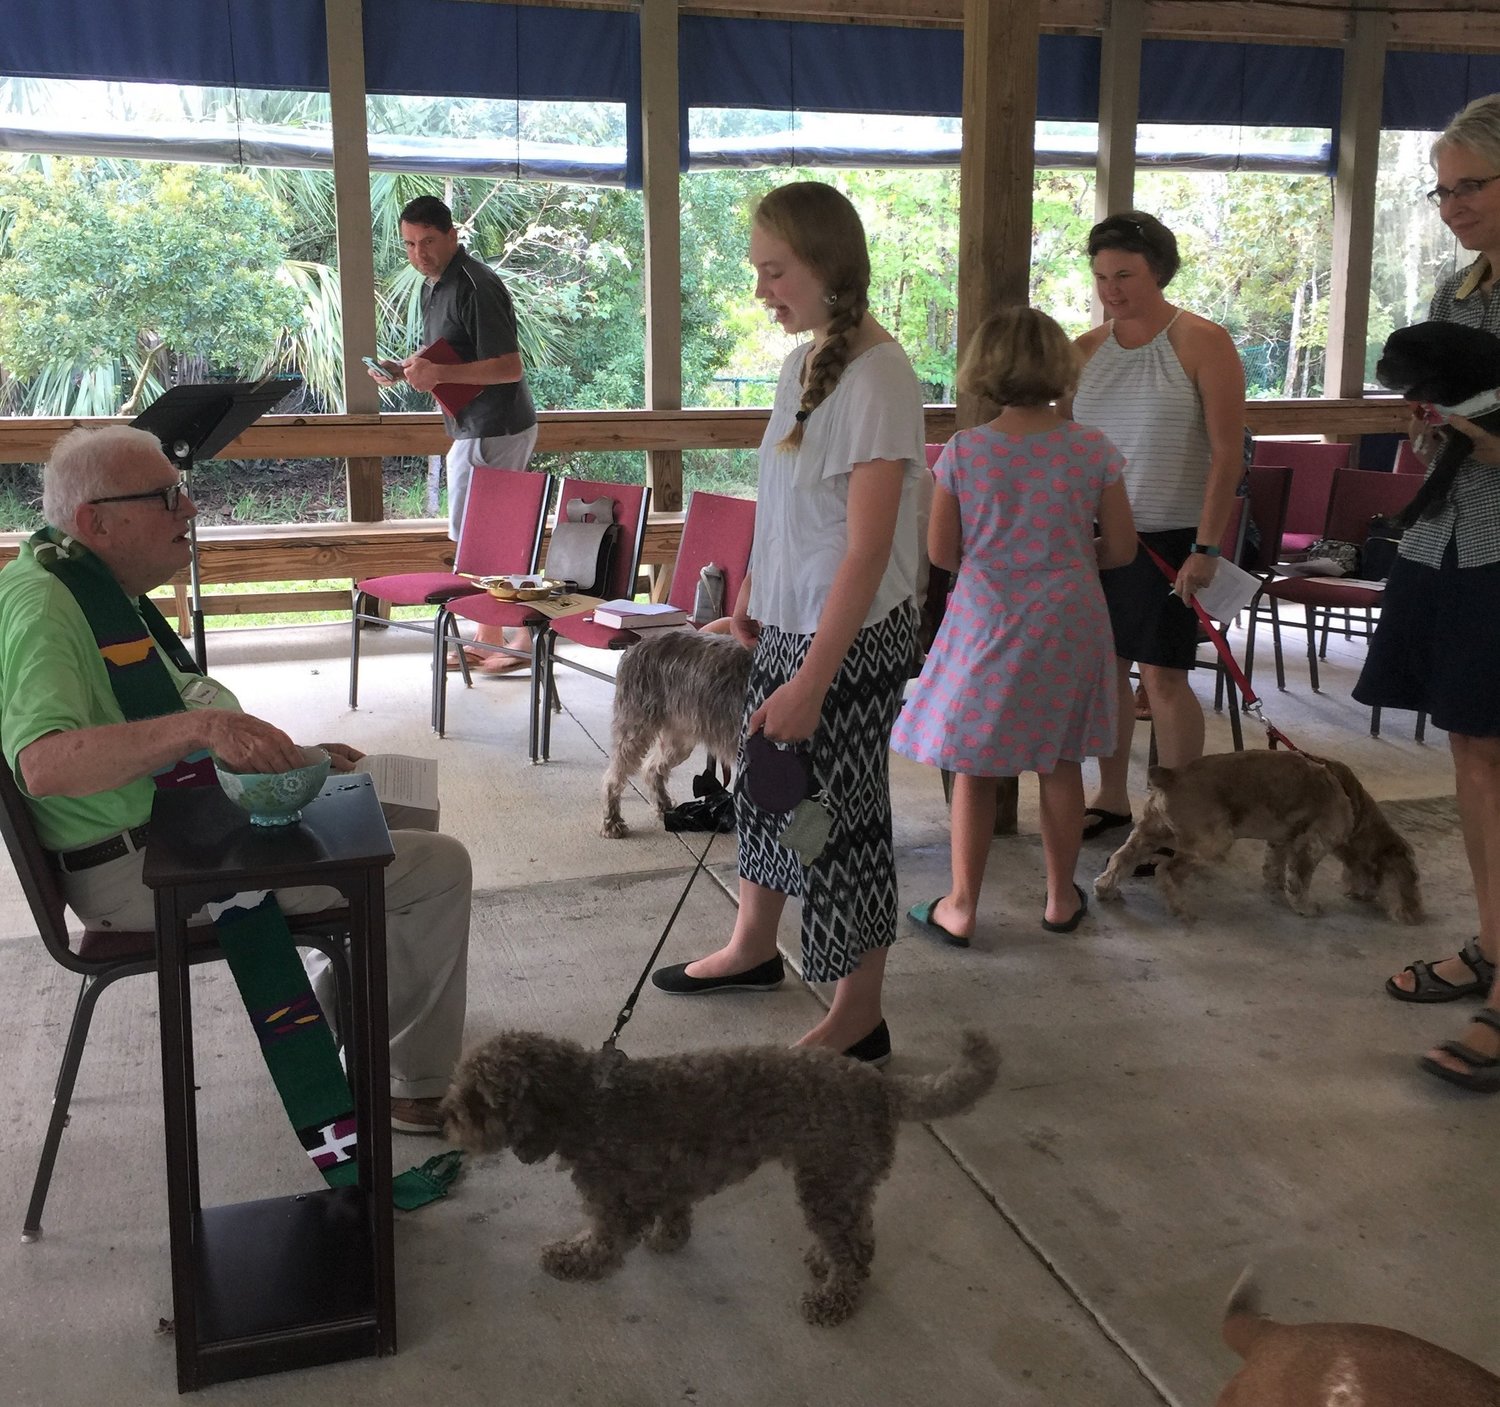 Every year, Lord of Life Lutheran Church members bring their pets to church for a special blessing.